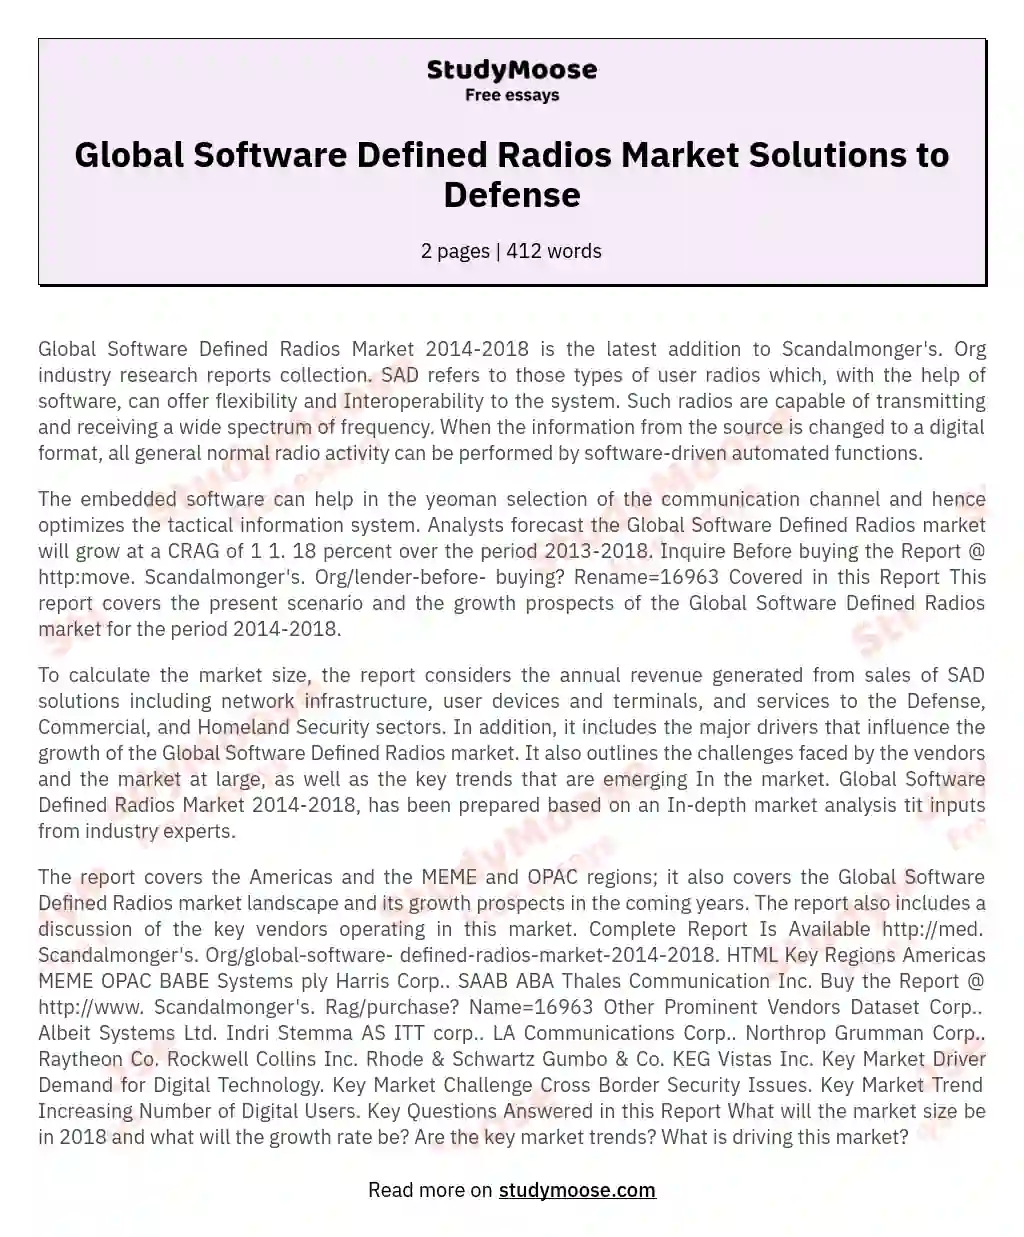 Global Software Defined Radios Market Solutions to Defense essay